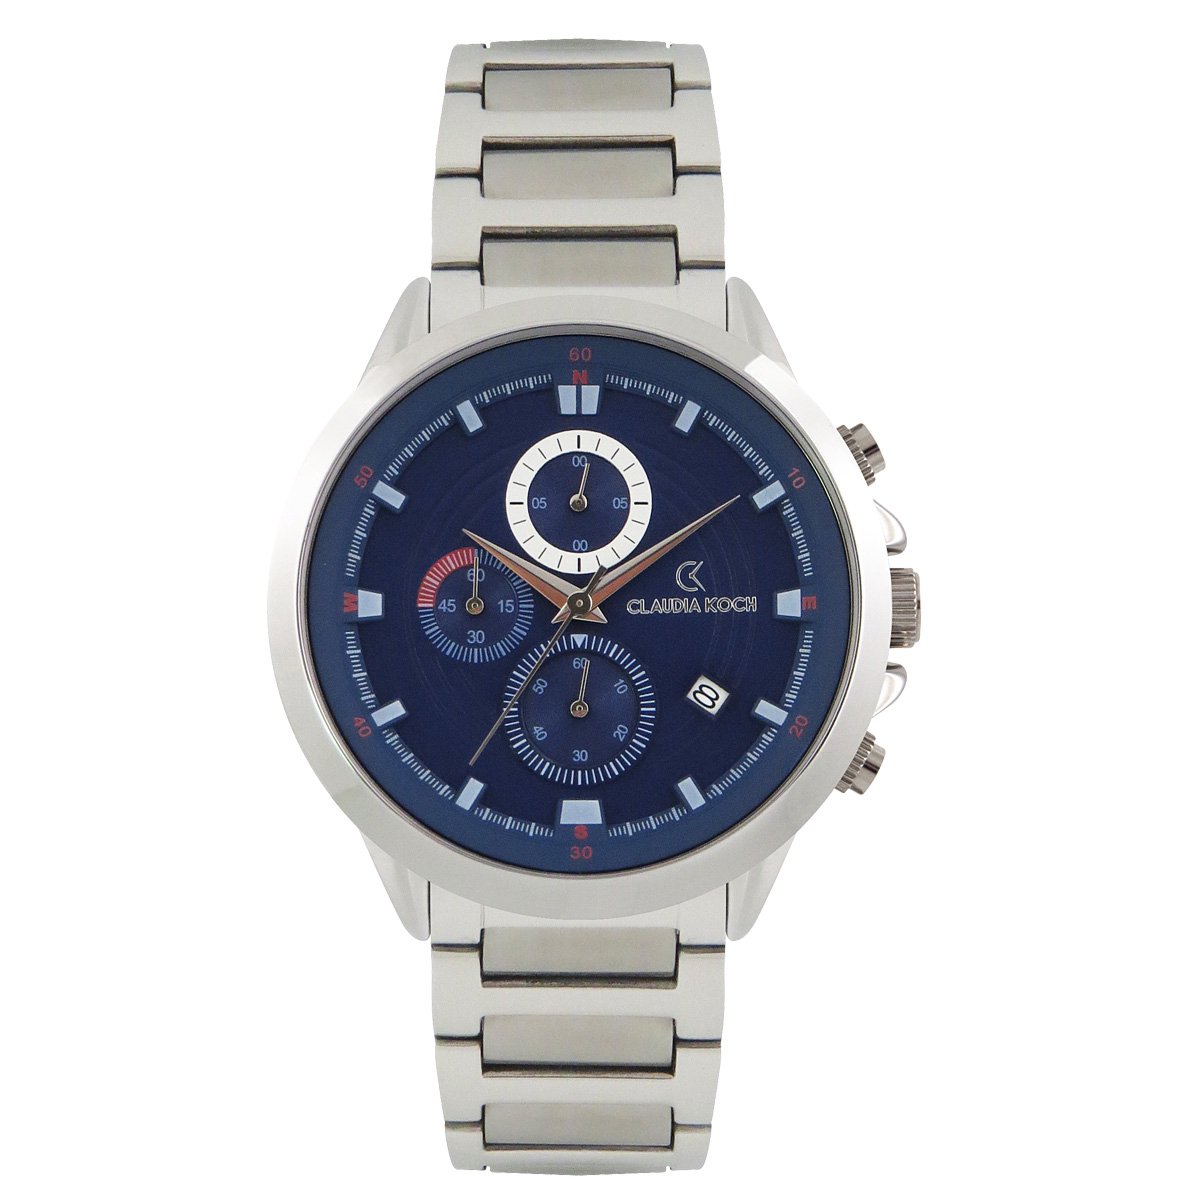 ClaudiaKoch CK 4315 Silver with Blue Analog Chronograph Stainless Steel